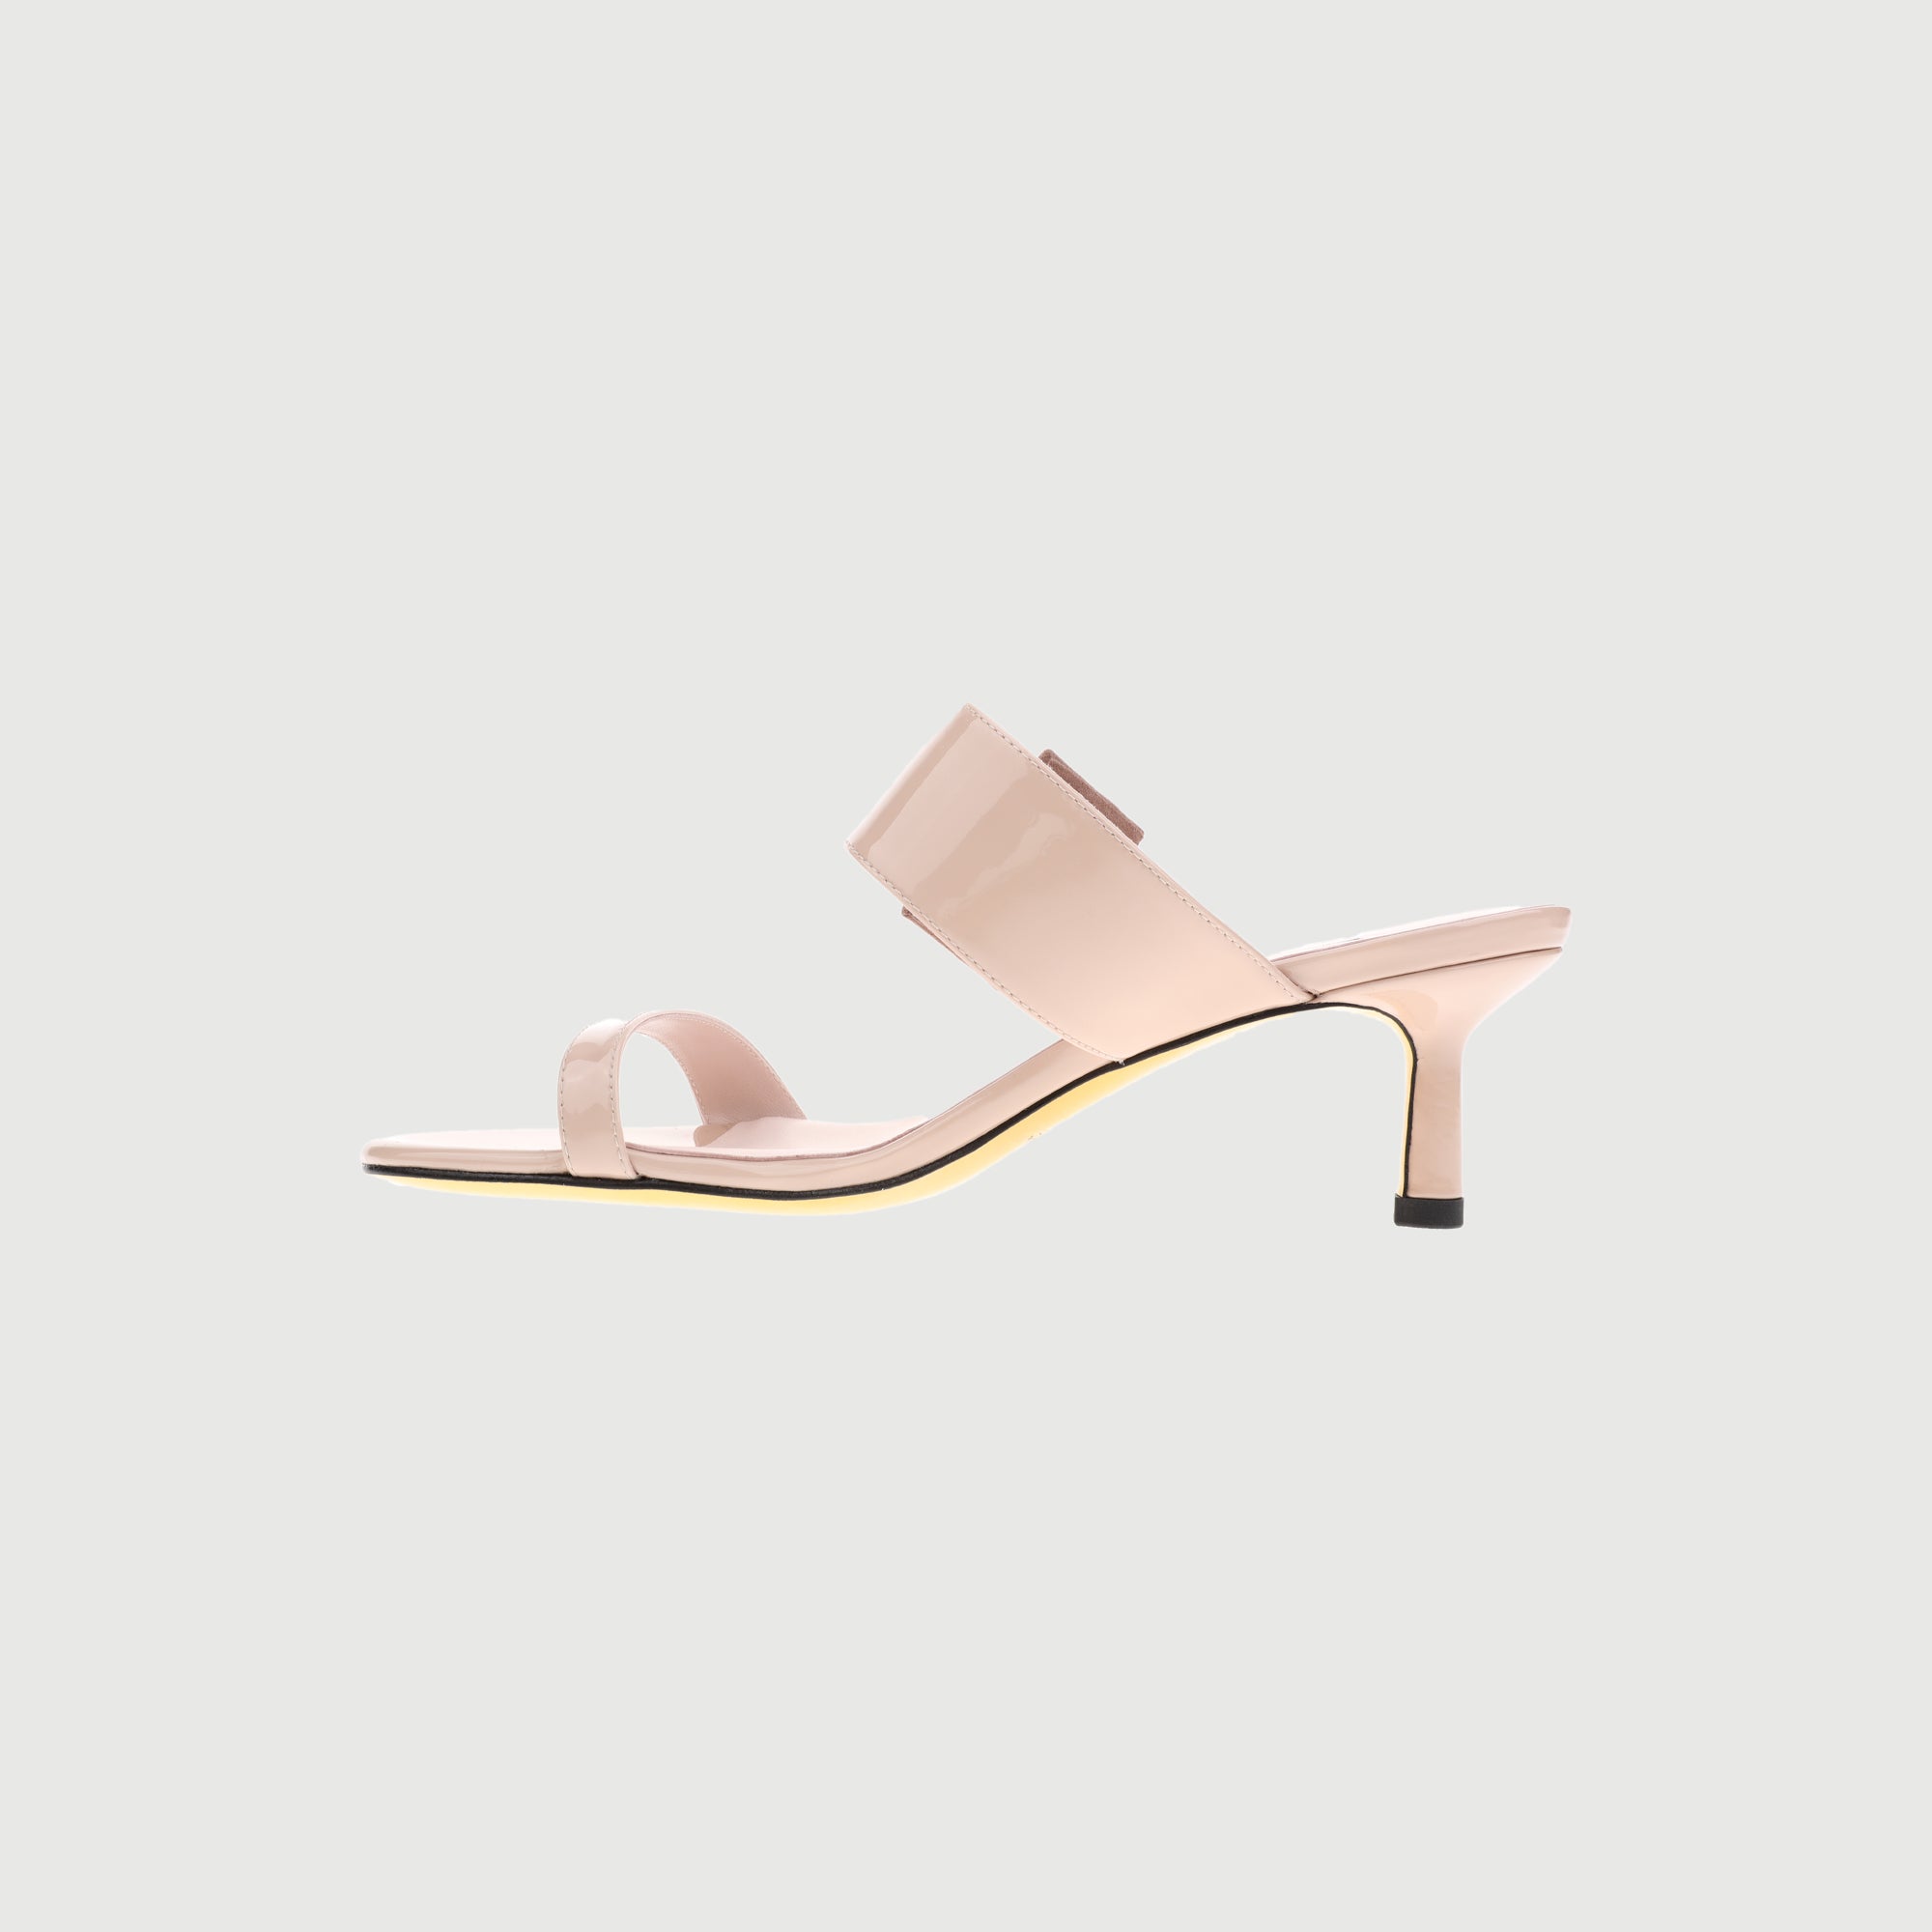 Nude sandals with crystal logo